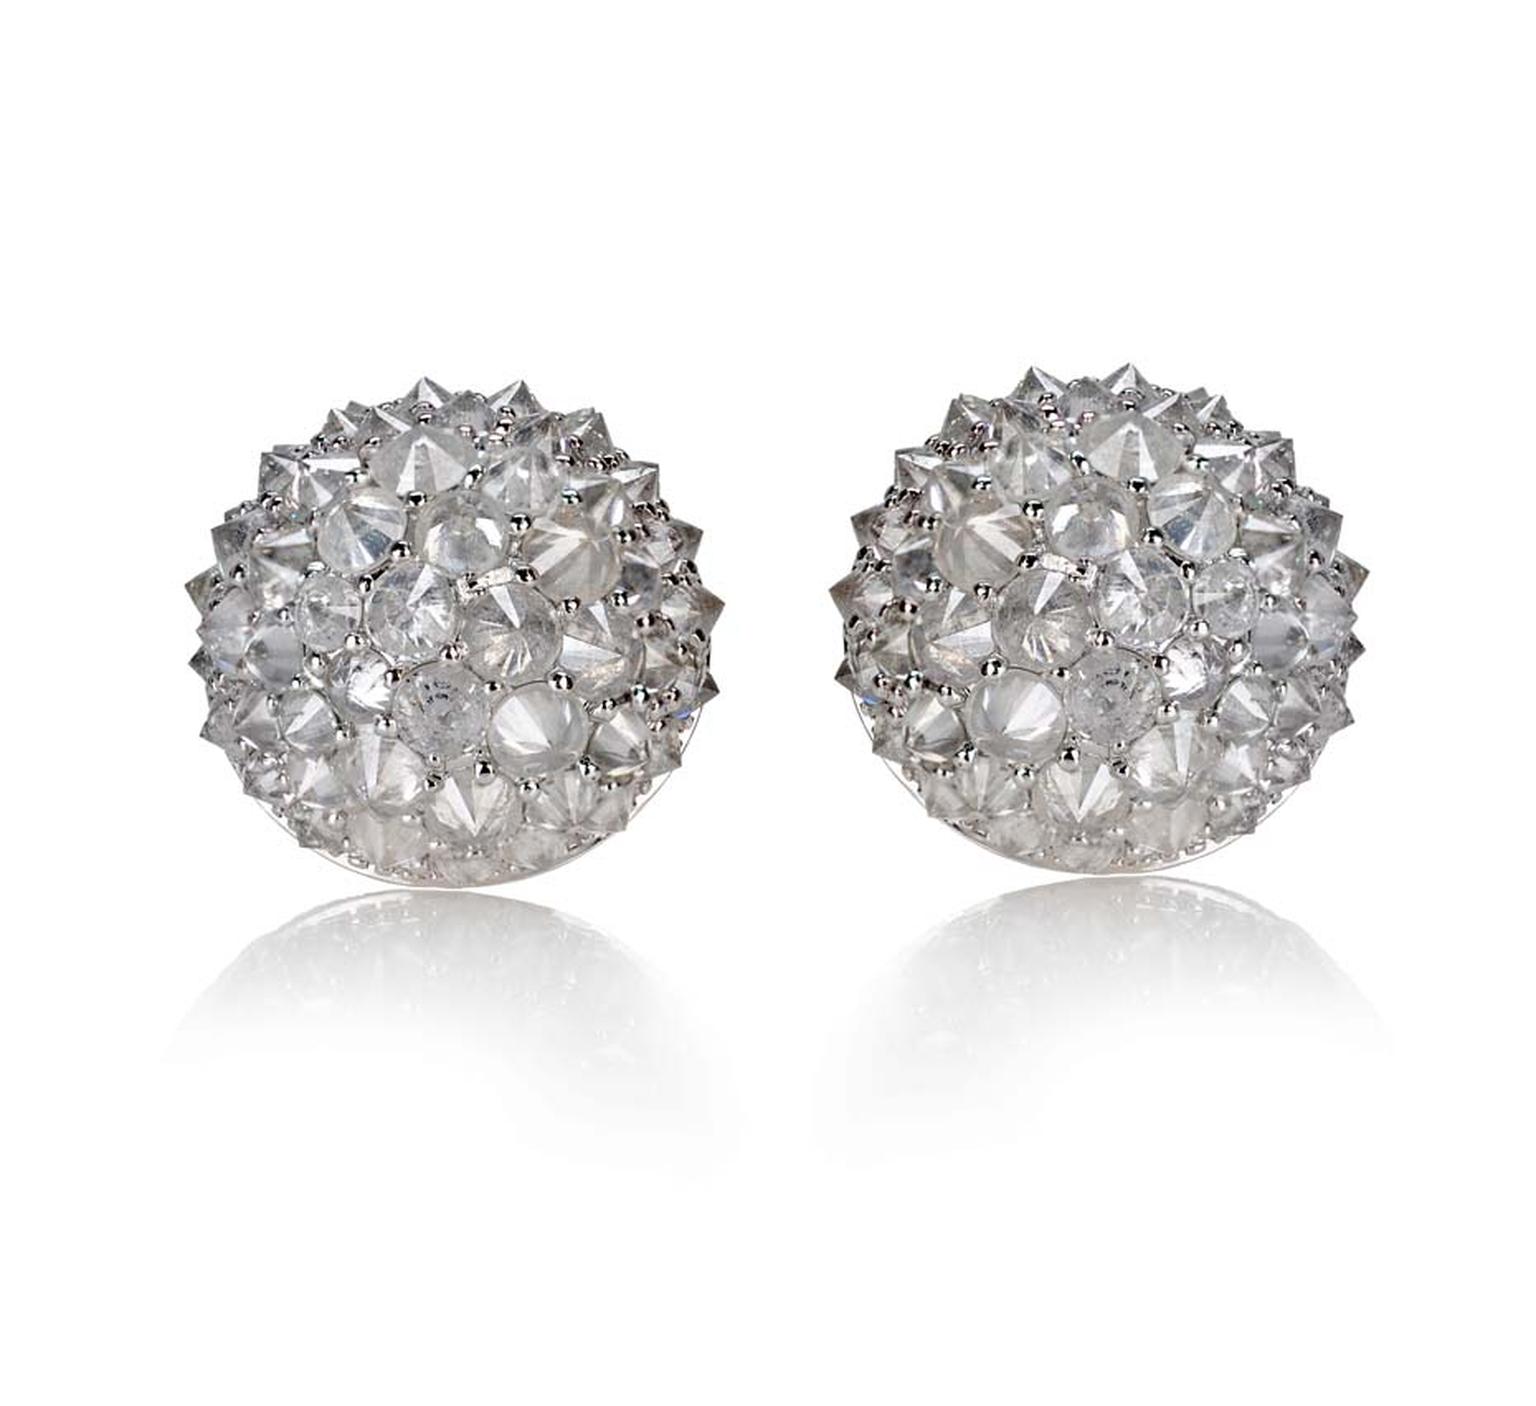 Nam Cho rose-cut pavé diamond earrings that mimic the texture of nubby bouclé fabric. Nam encourages people to touch her work so that they can appreciate the texture and feel (from $12,990).